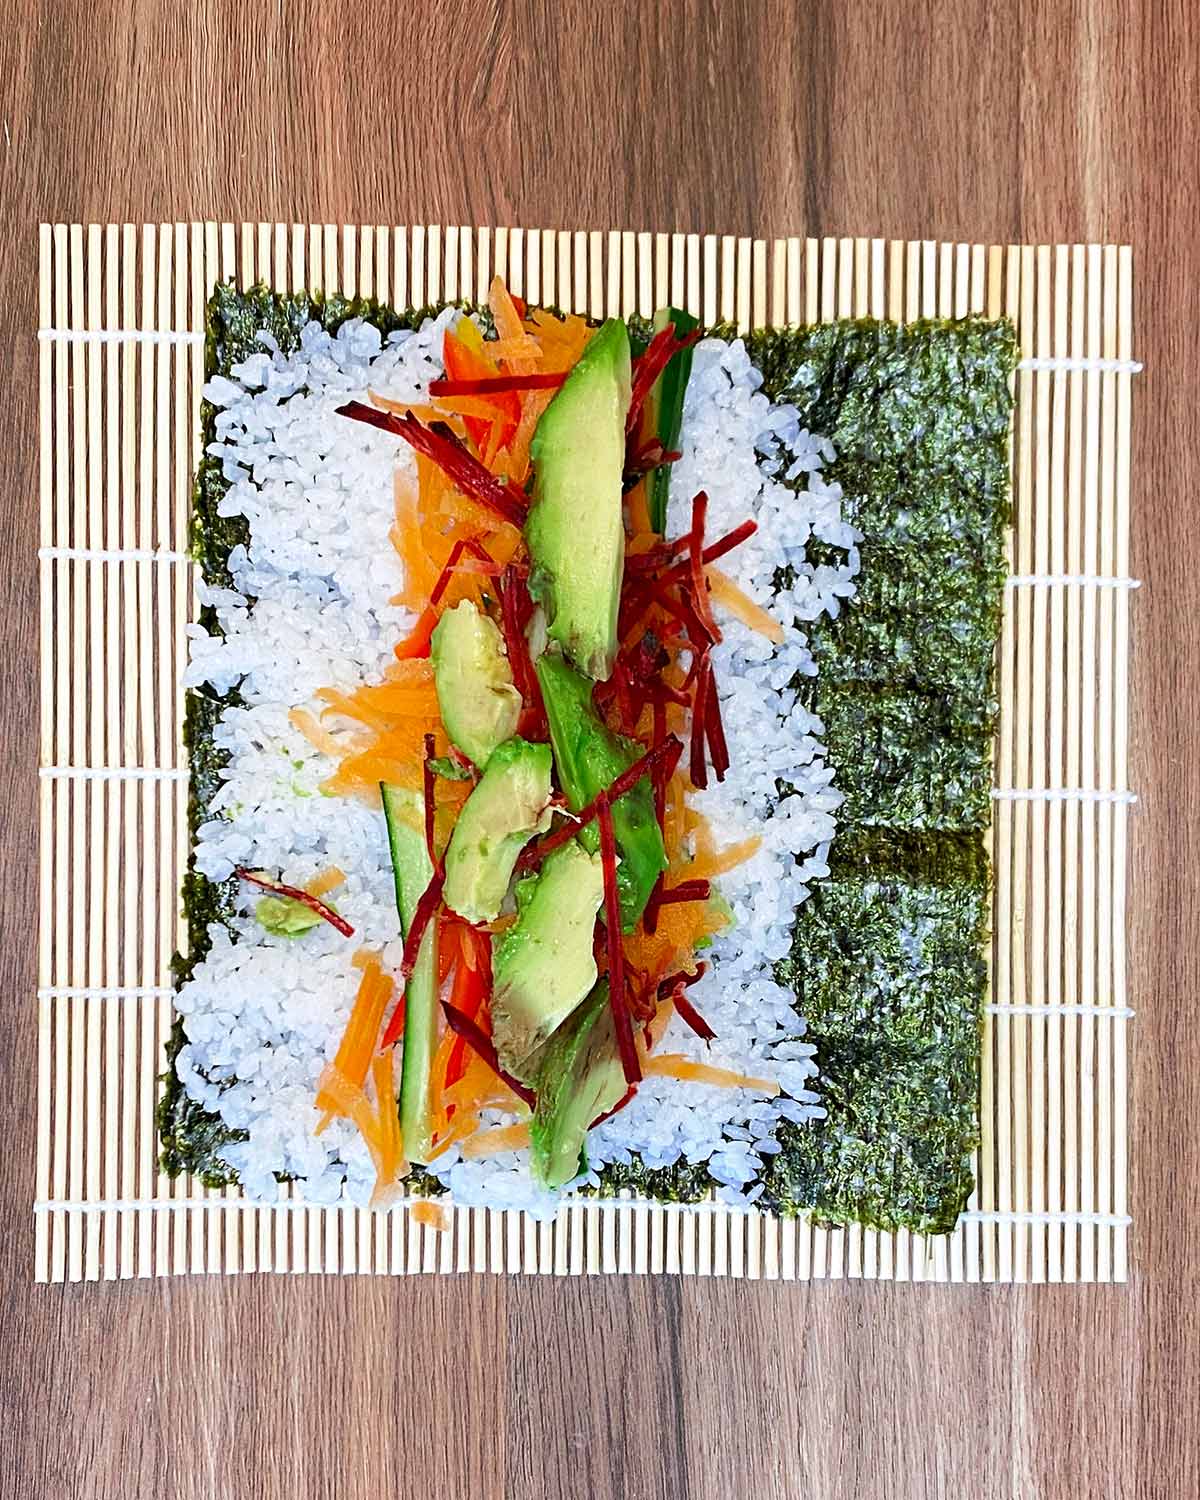 Strips of vegetables laid on top of the rice.